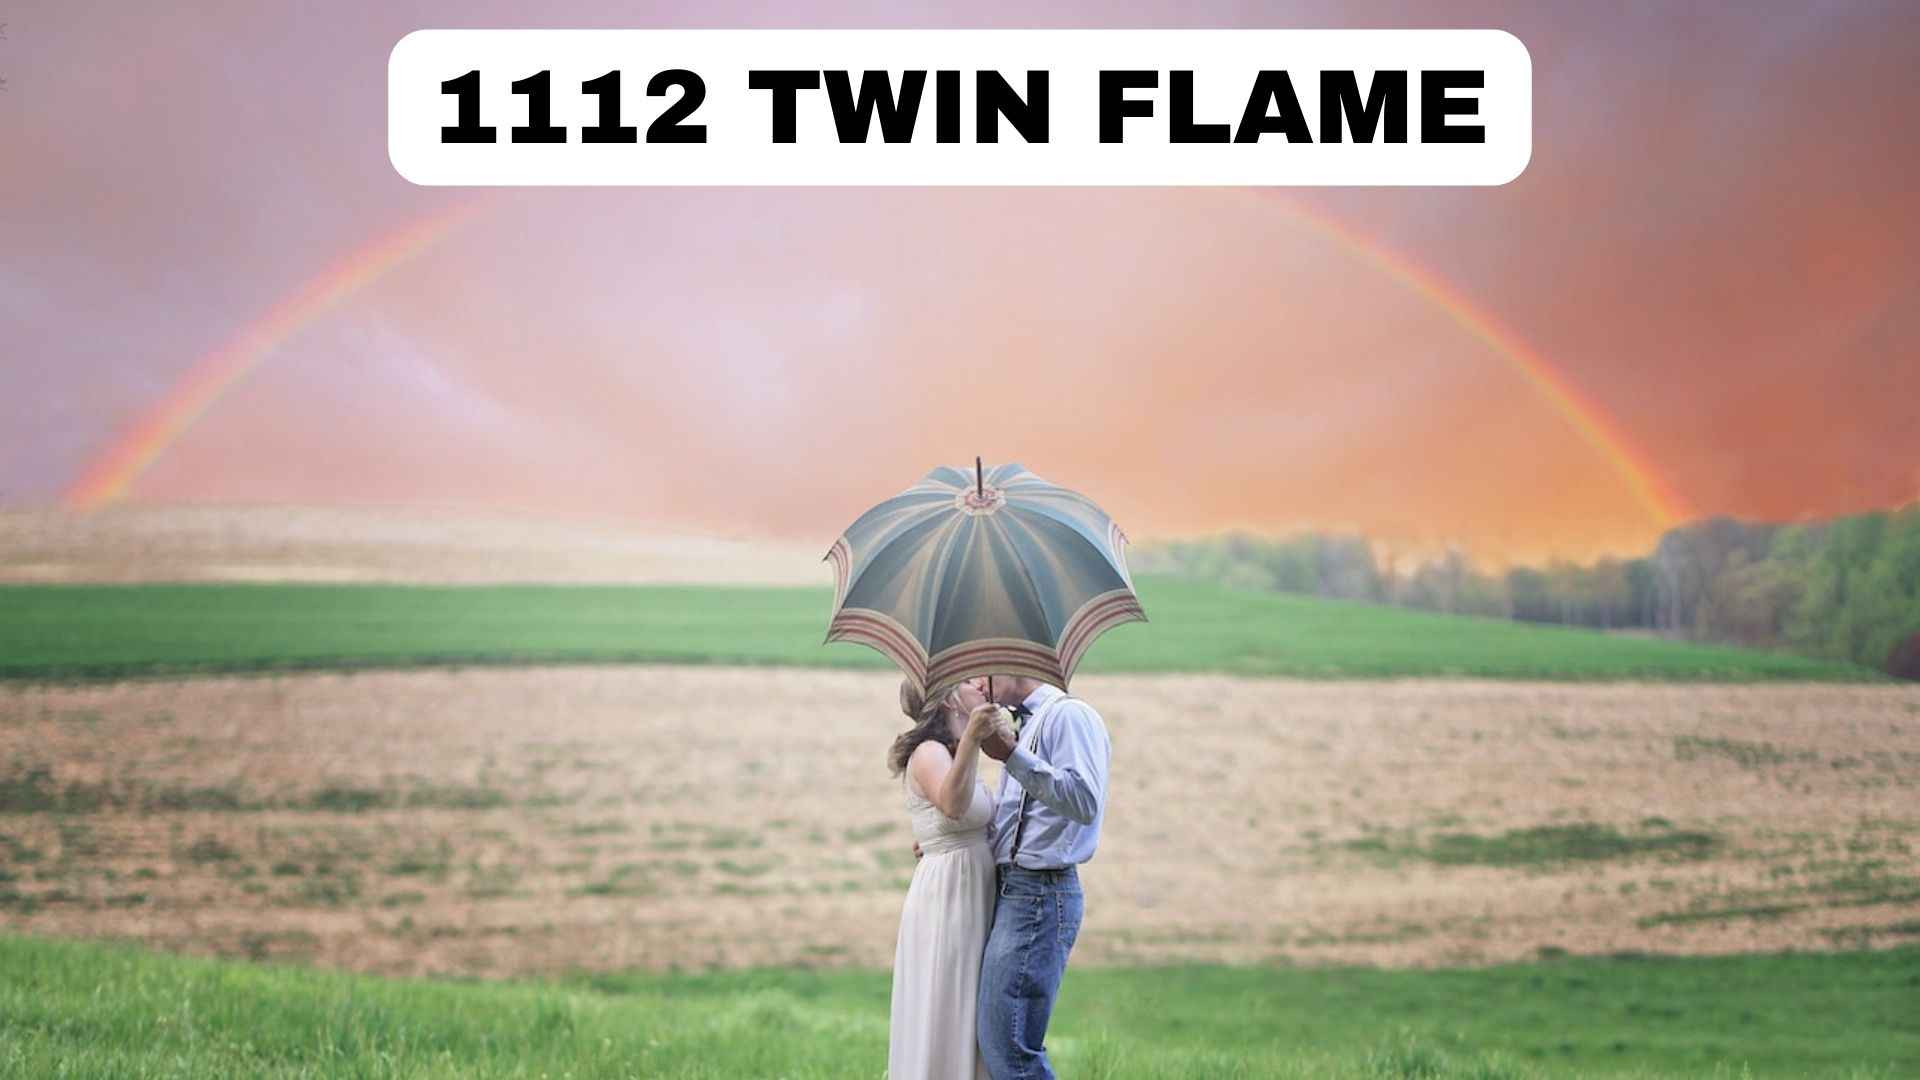 1112 Twin Flame Meaning And Its Significance In Life